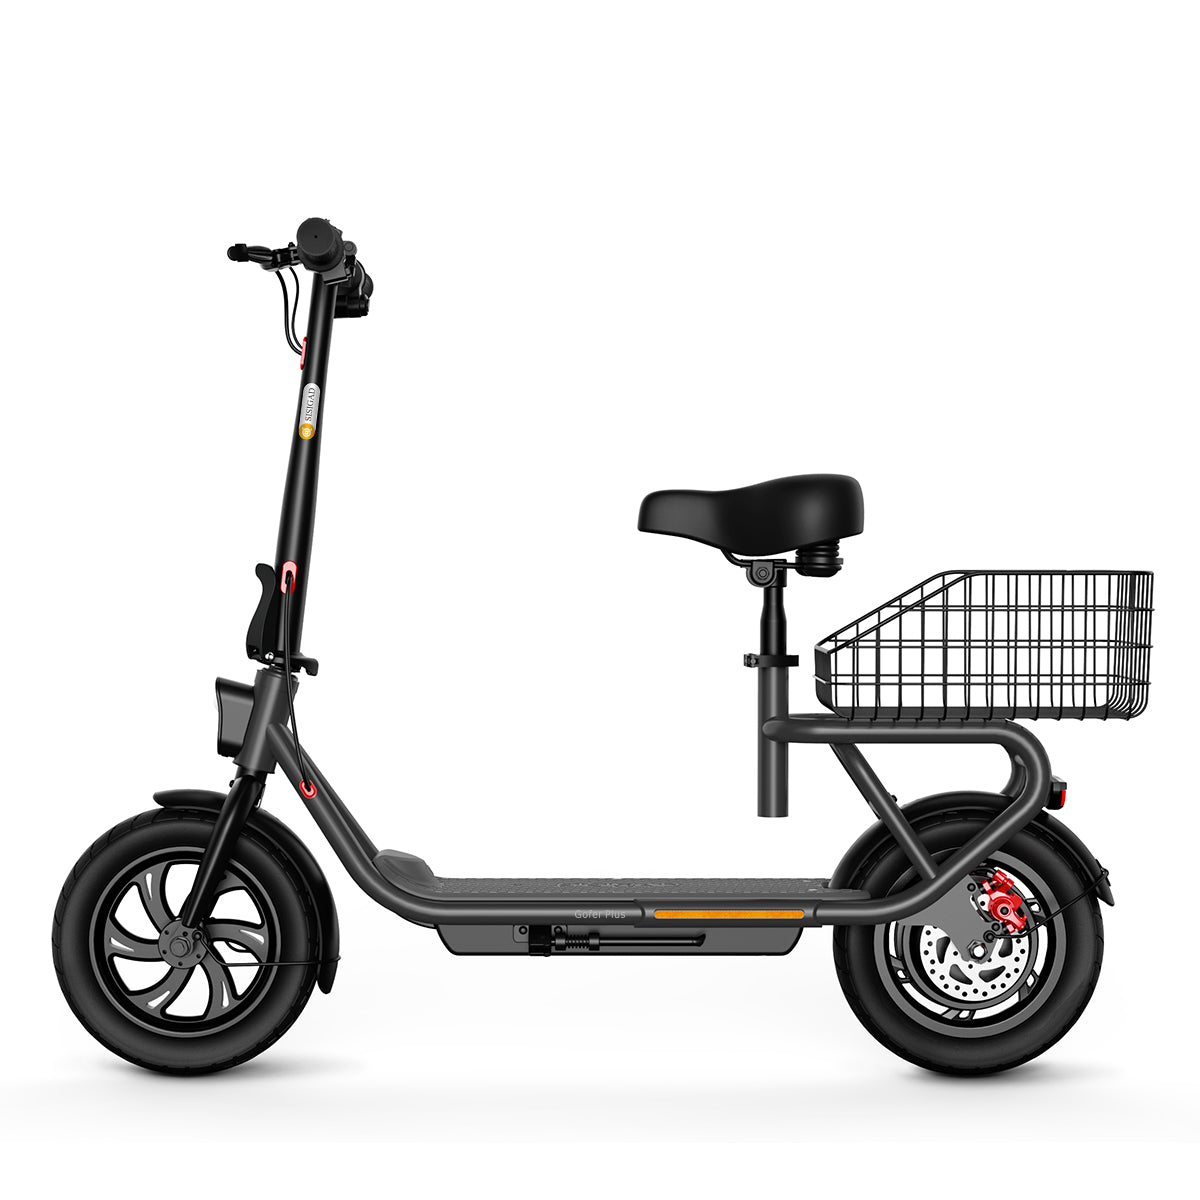 Sisigad Gofer Plus 12“ Fat Tire Electric Bike For Shopping